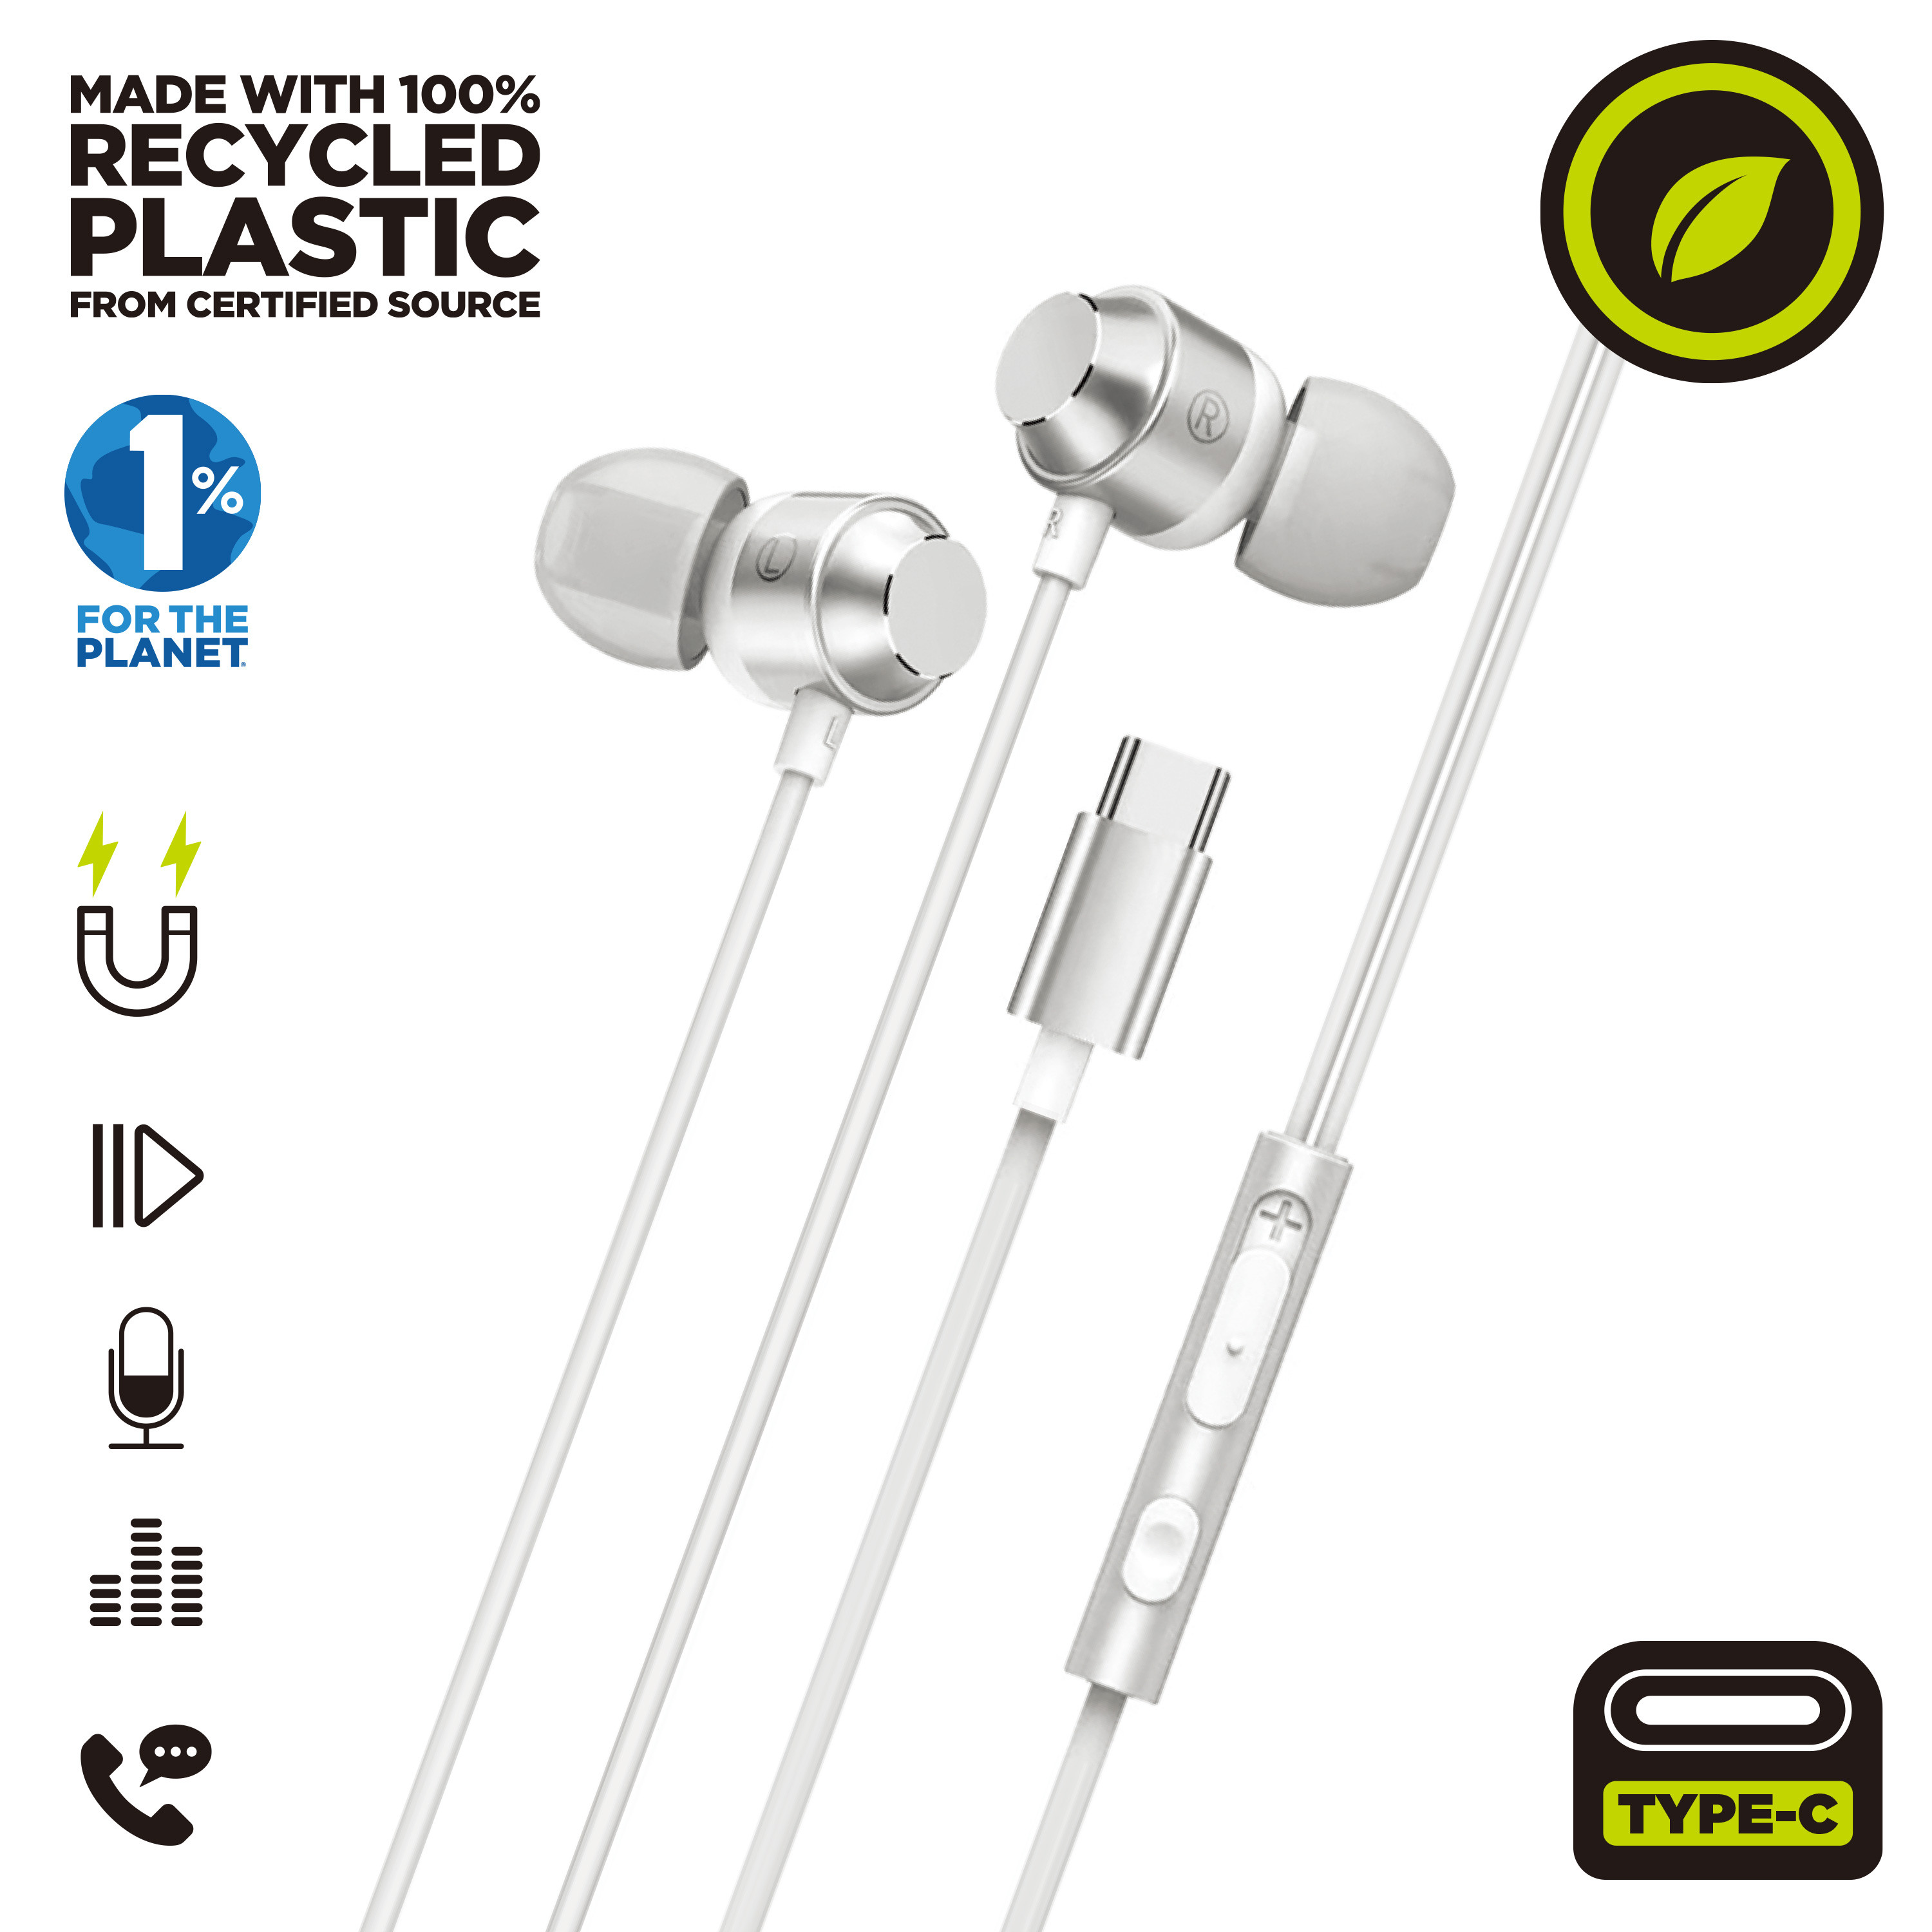 Auriculares Muvit For Charge Estéreo M32 Tipo C Magnéticos - Blanco  MKP